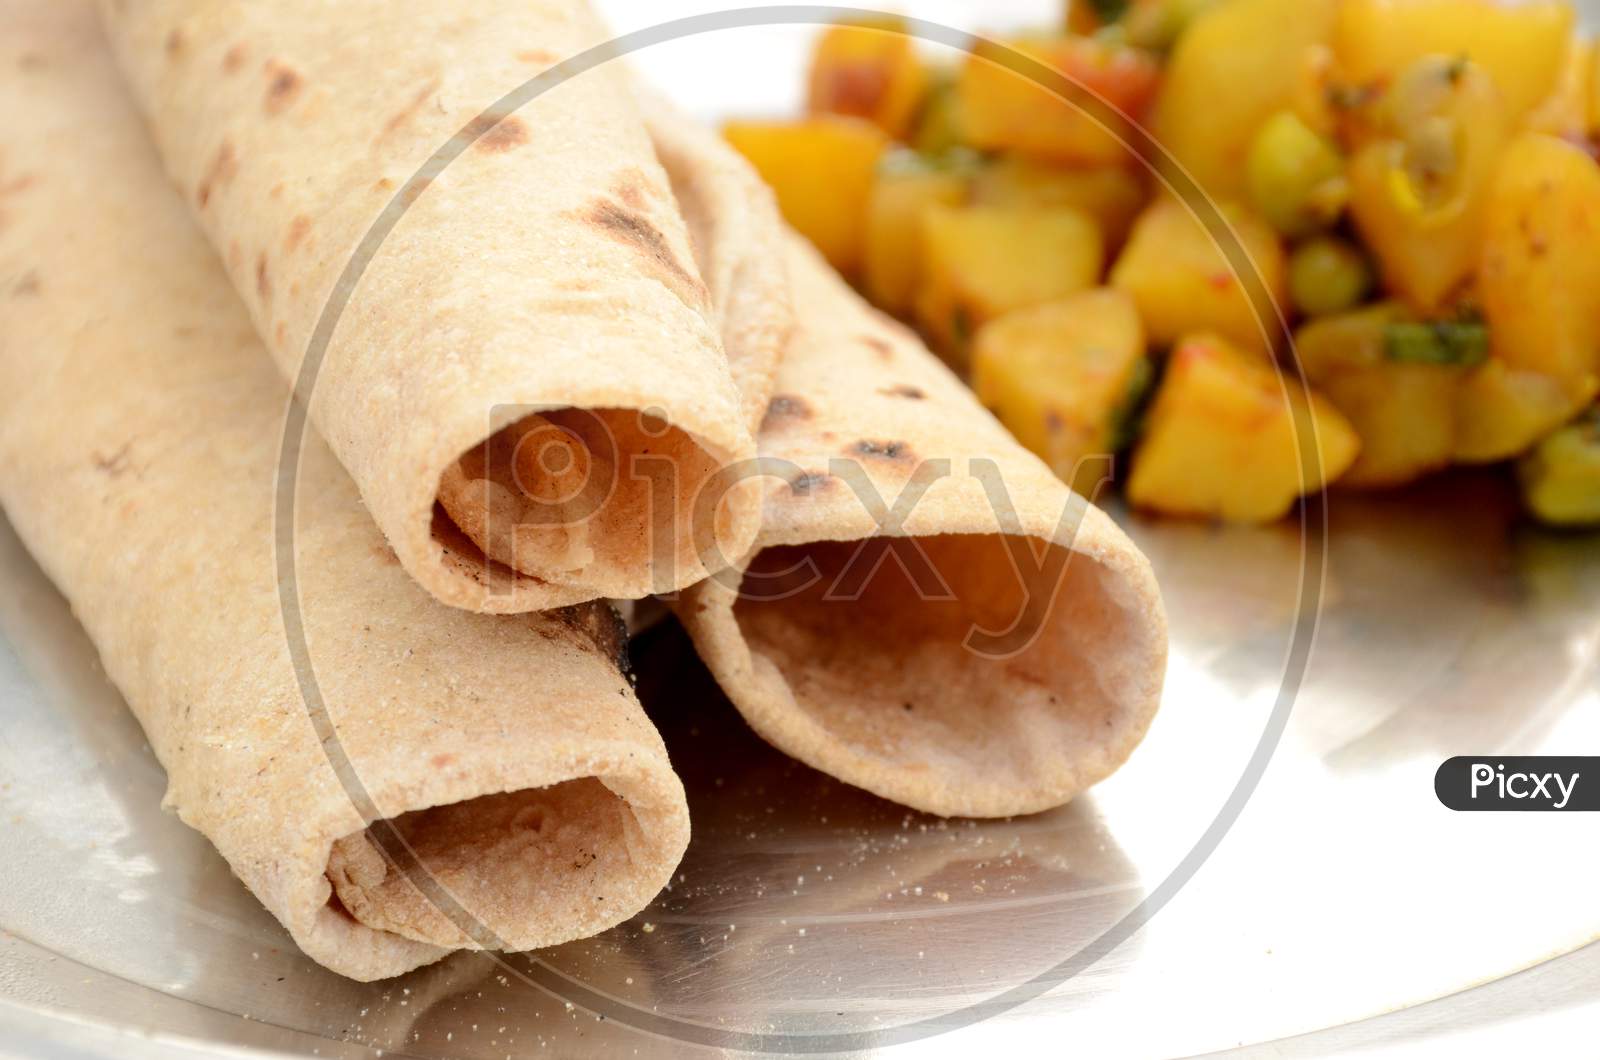 The Brown Unleavened Bread With Potato Peas Vegetable Made On The White Background.